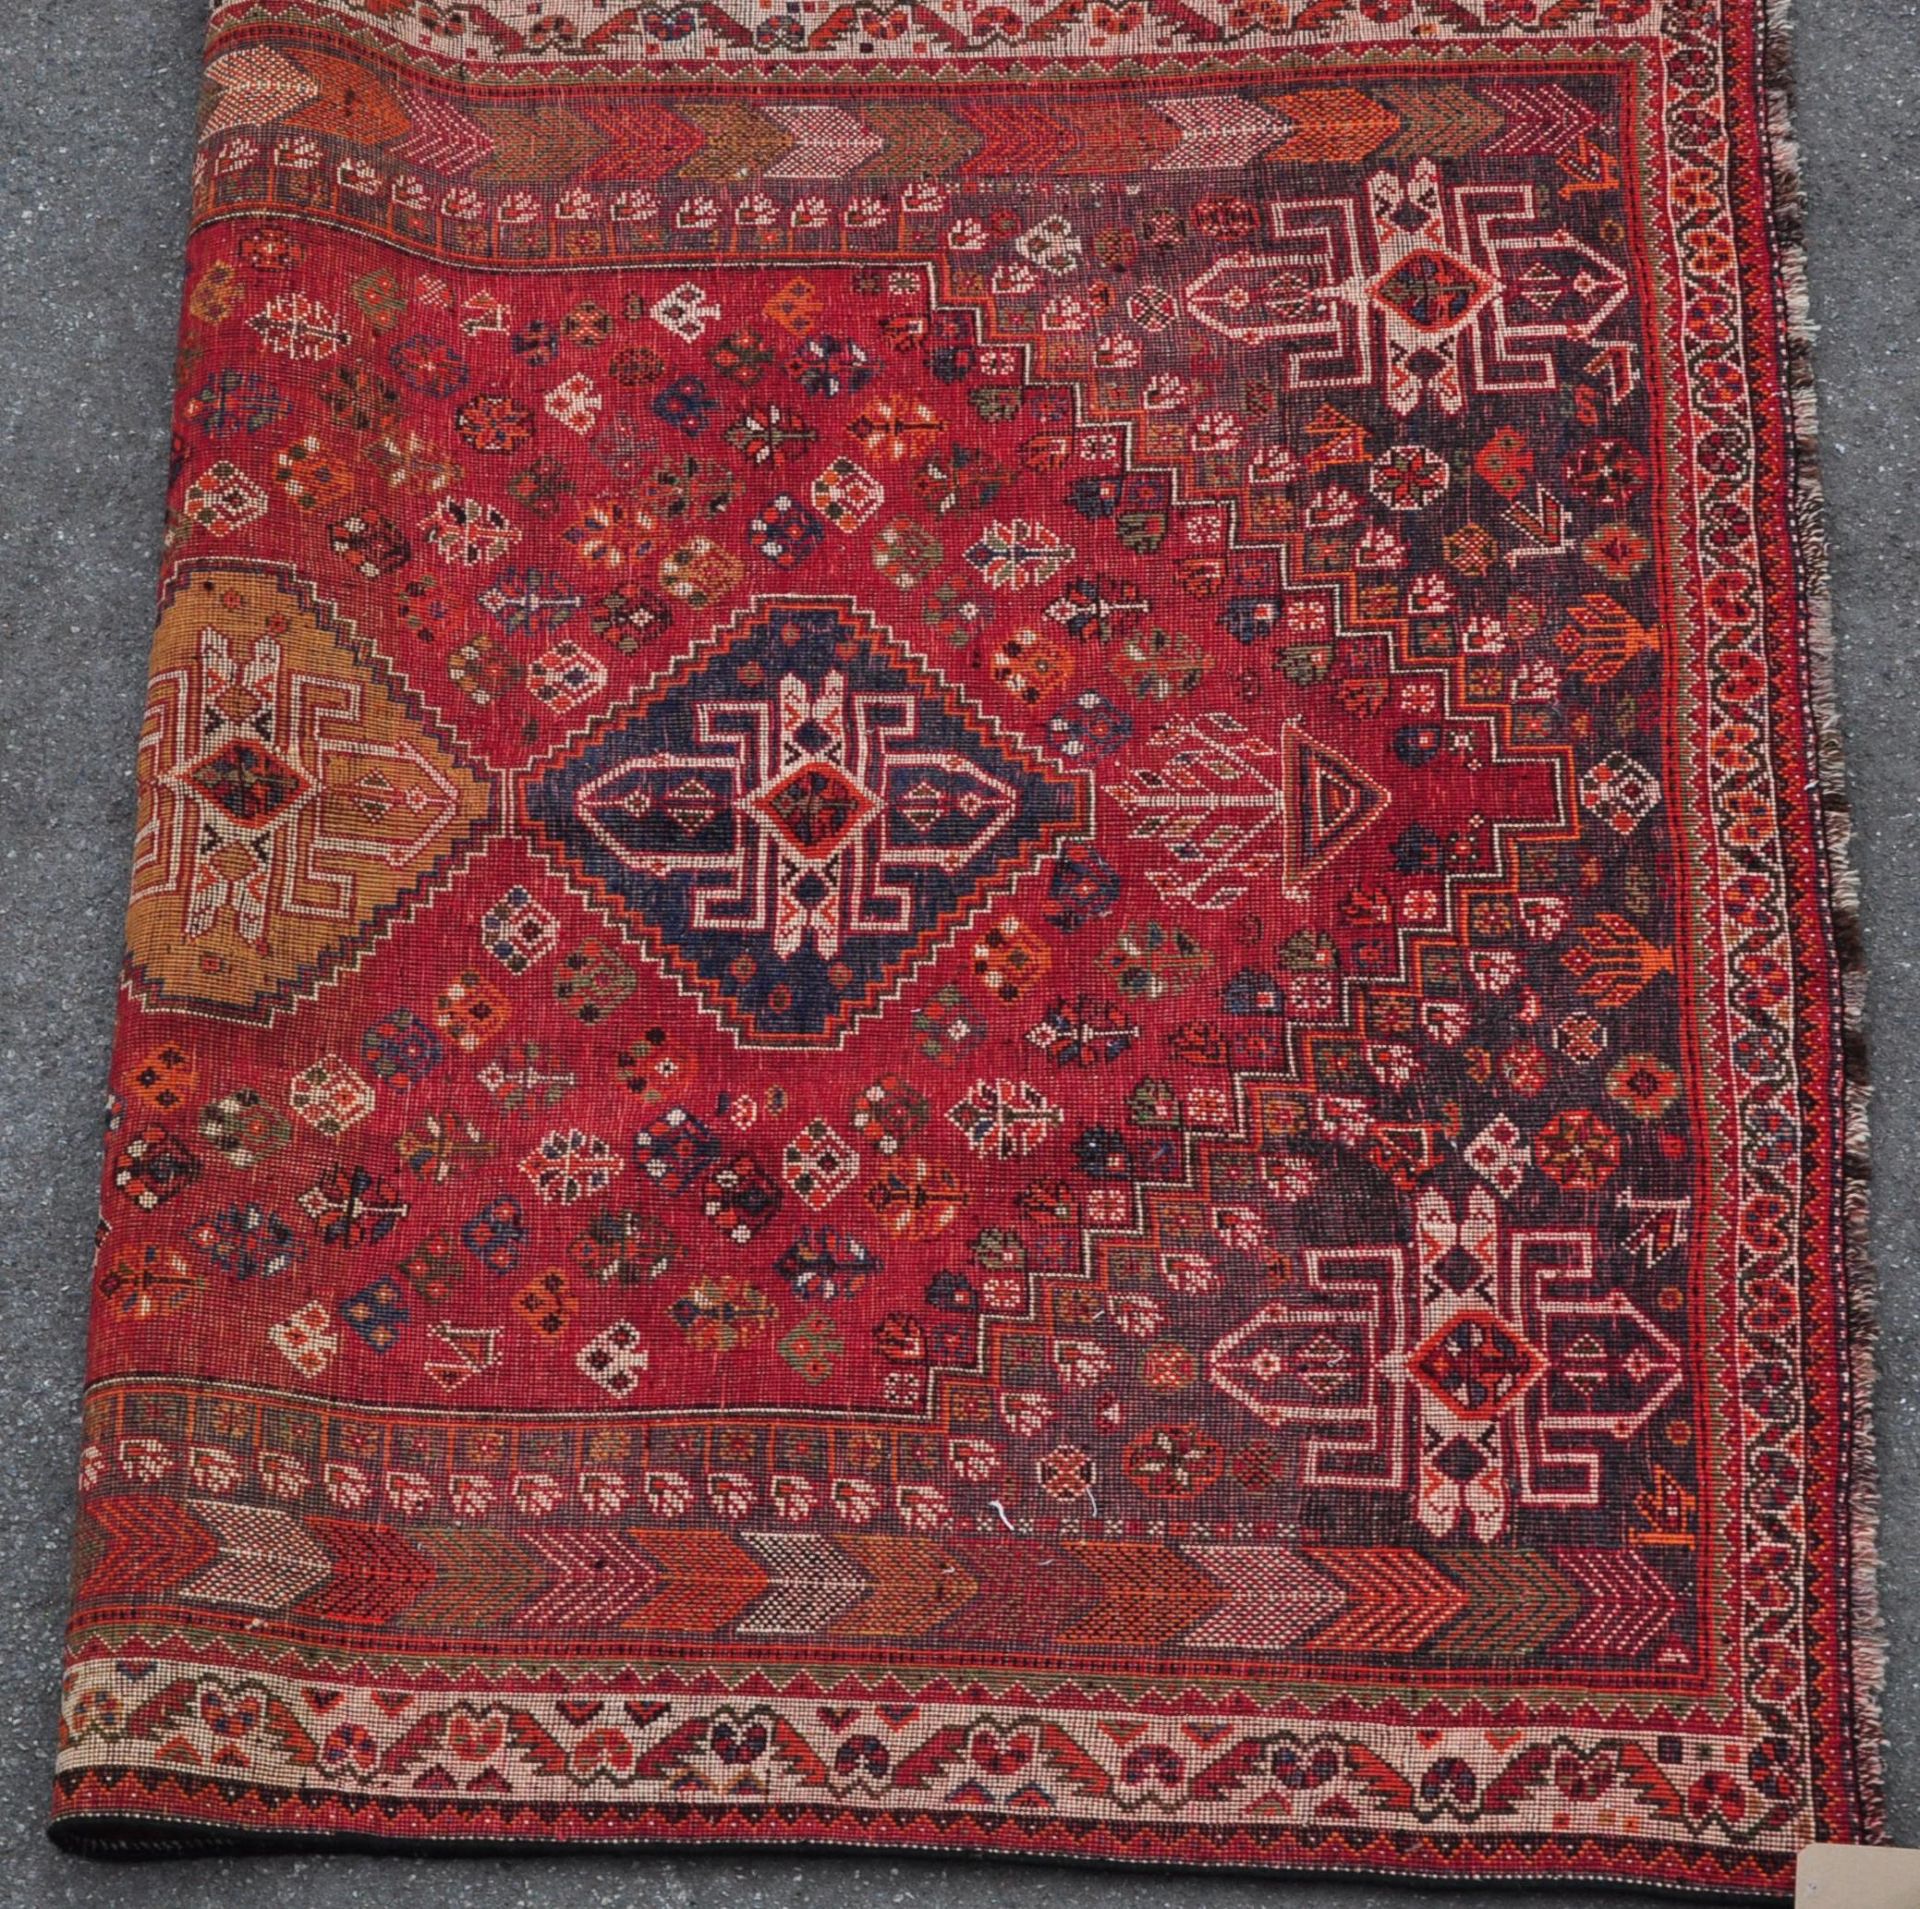 EARLY 20TH CENTURY WOOL ON WOOL HAND KNOTTED PERSIAN ISLAMIC QASHGAI RUG - Image 4 of 4